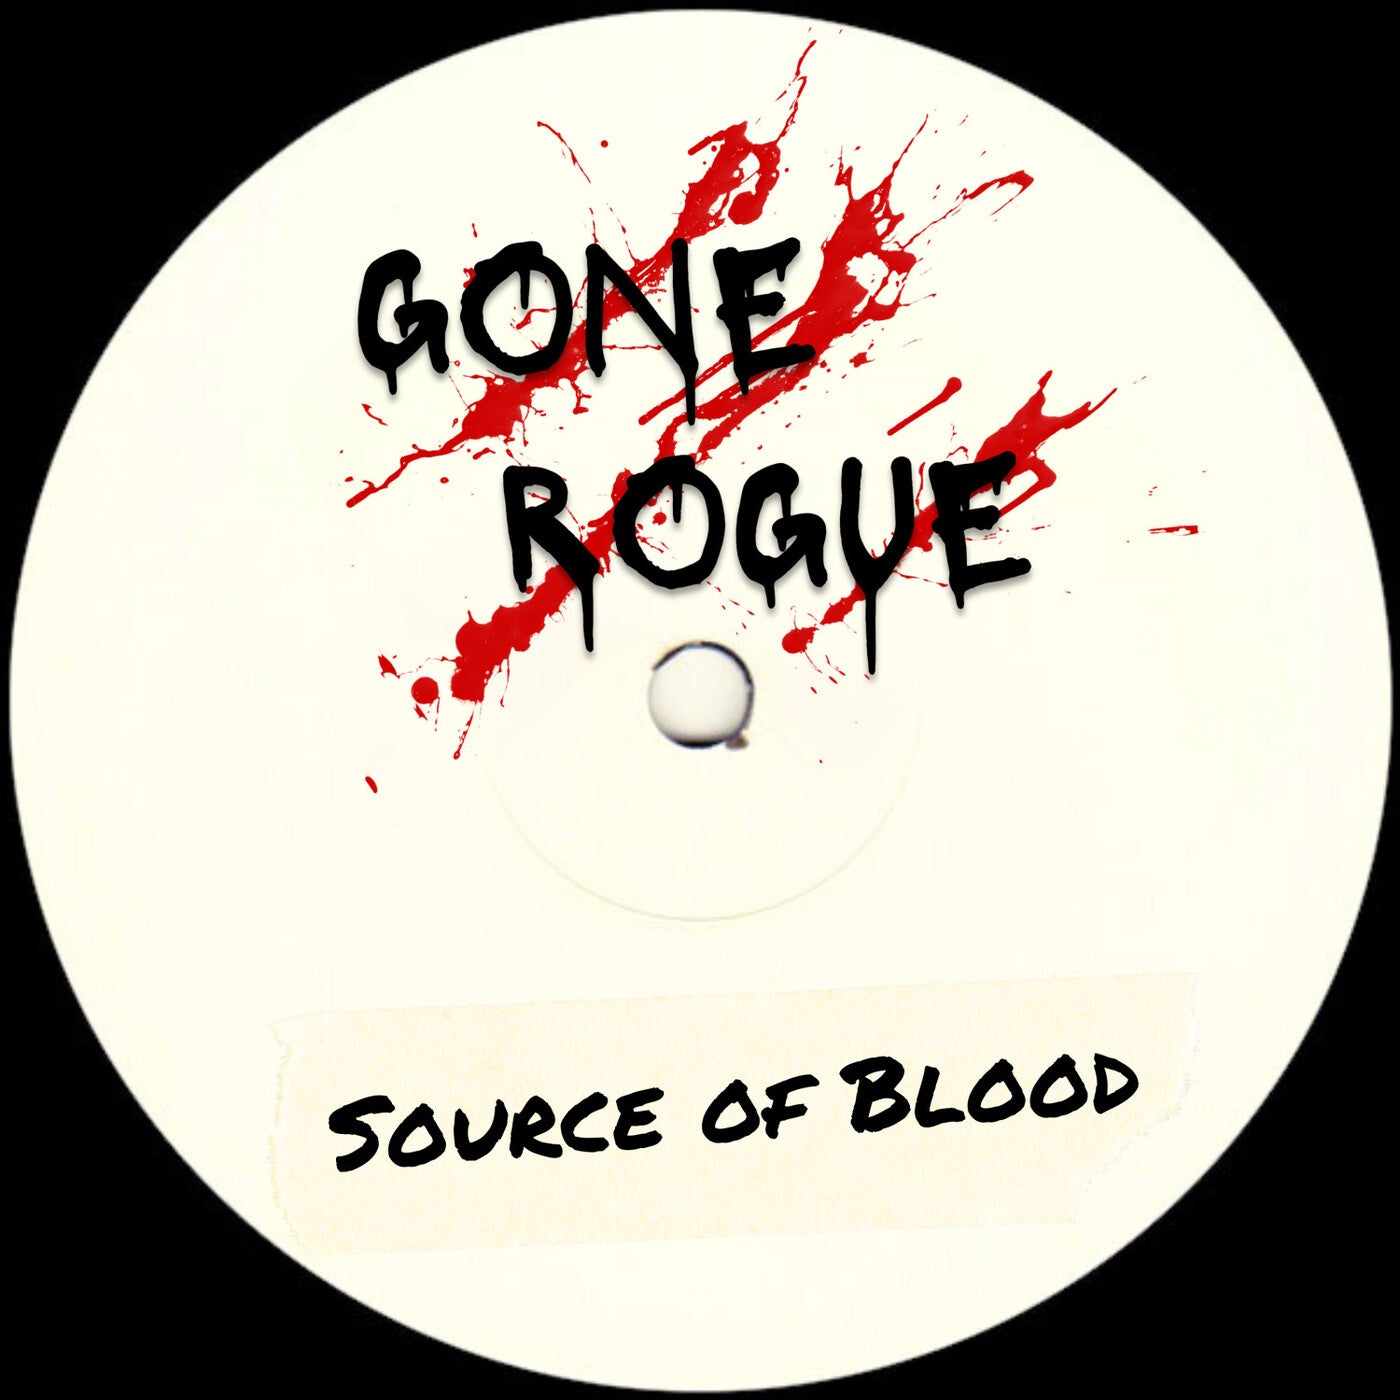 Source of Blood